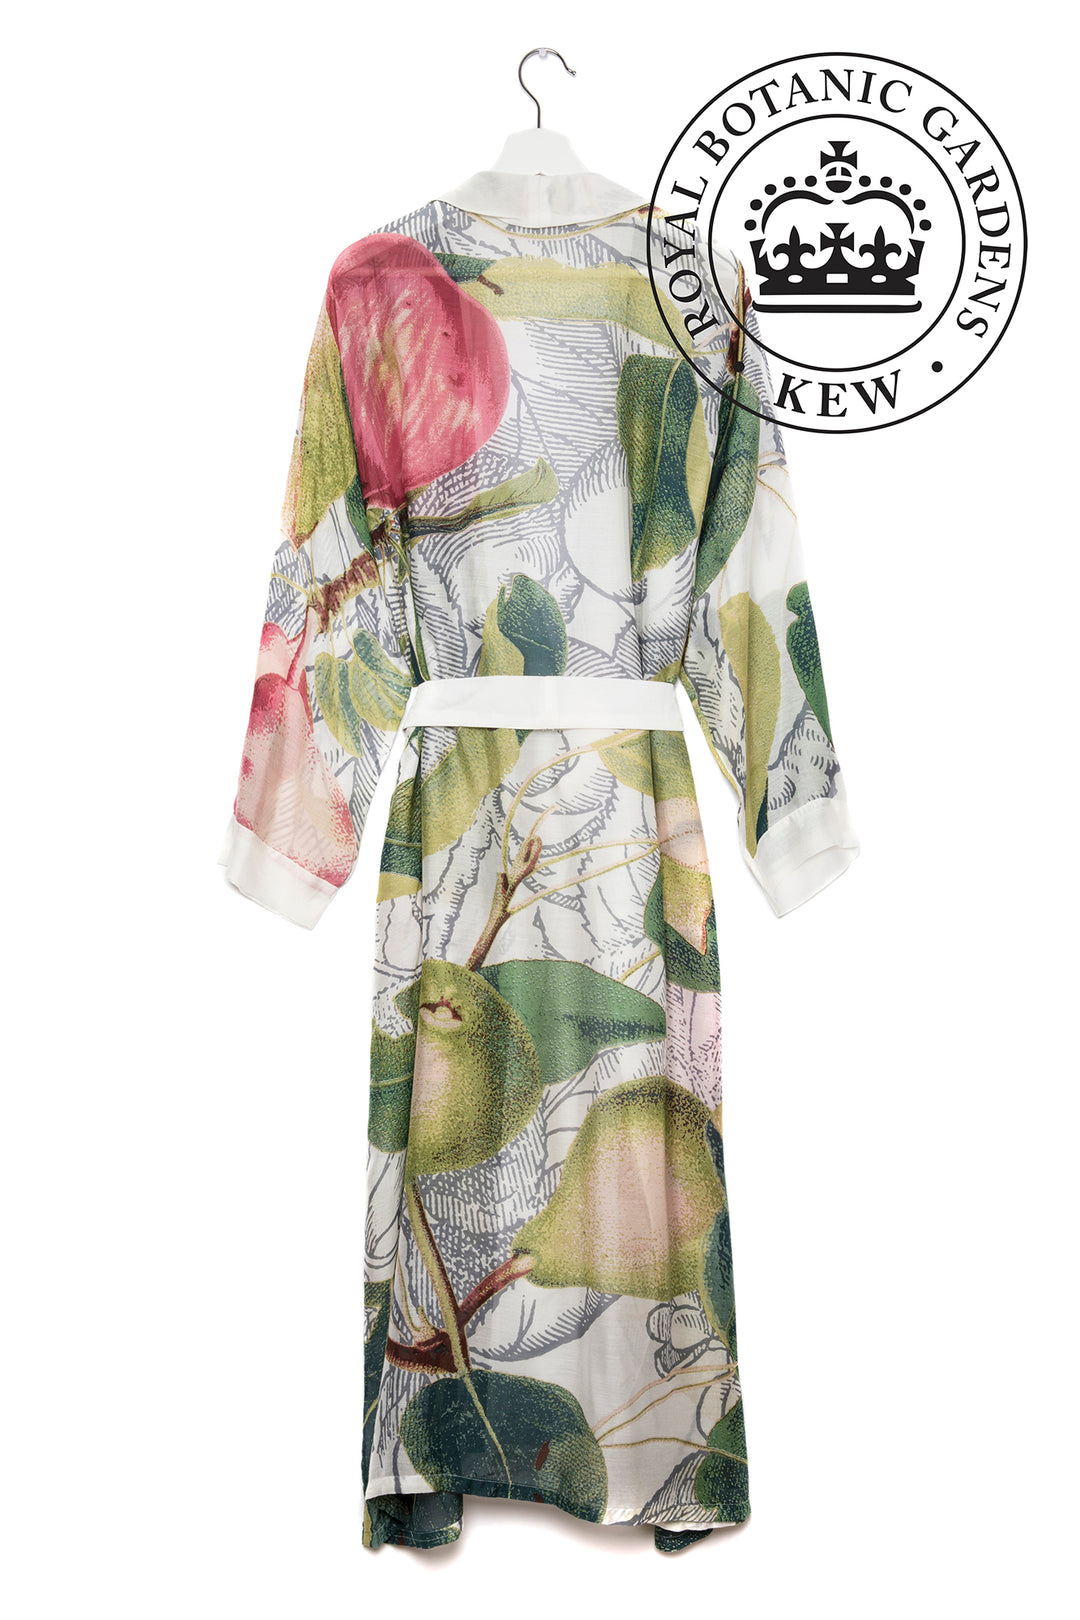 KEW Apples and Pears White Gown